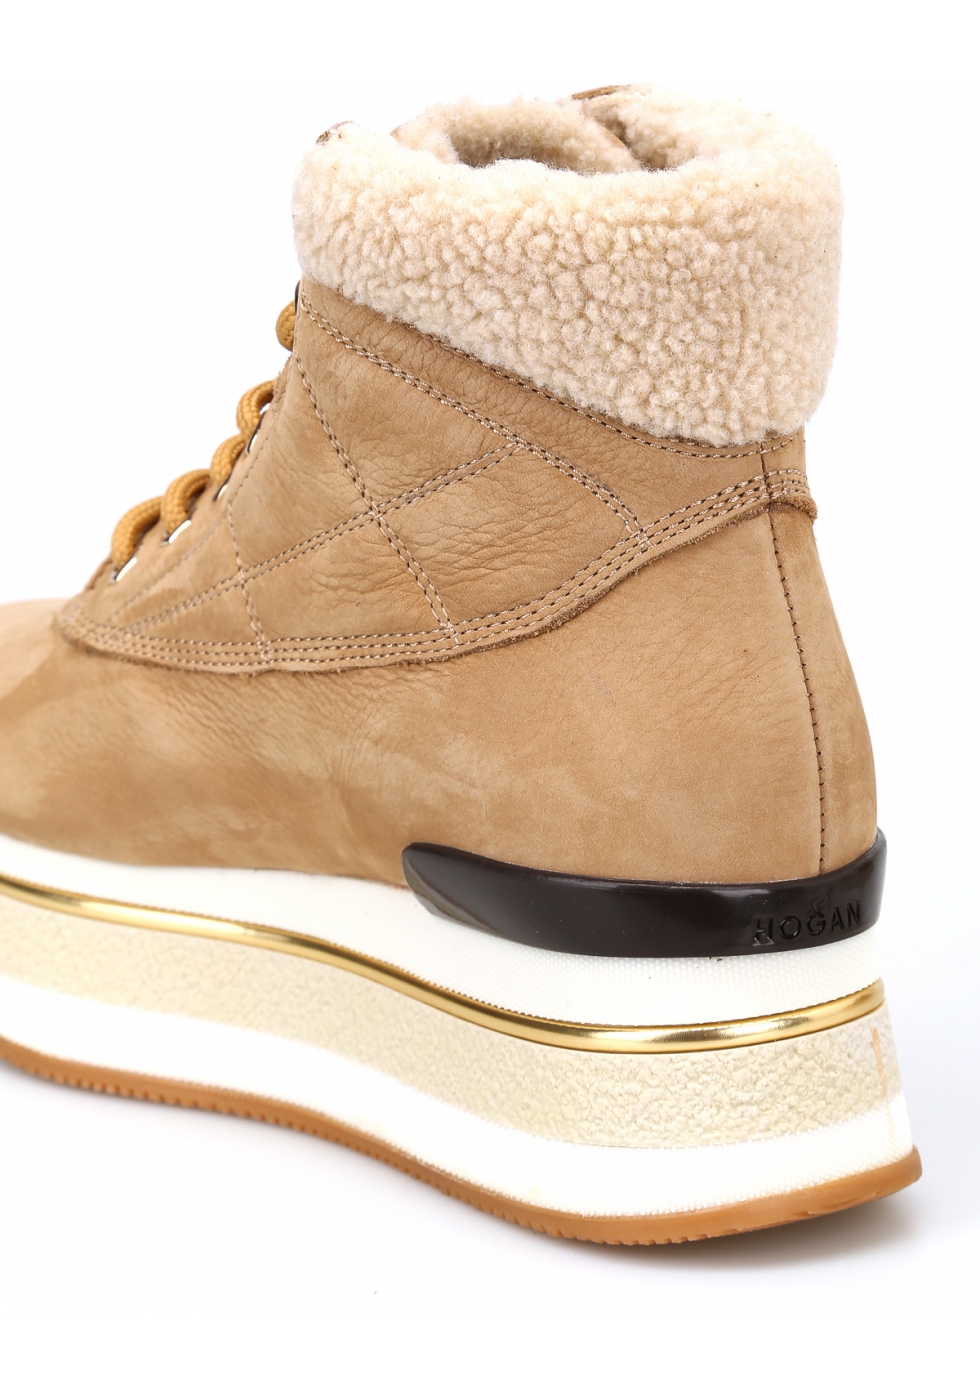 Hogan women's wedge ankle boots in beige nubuck and wool - Italian Boutique